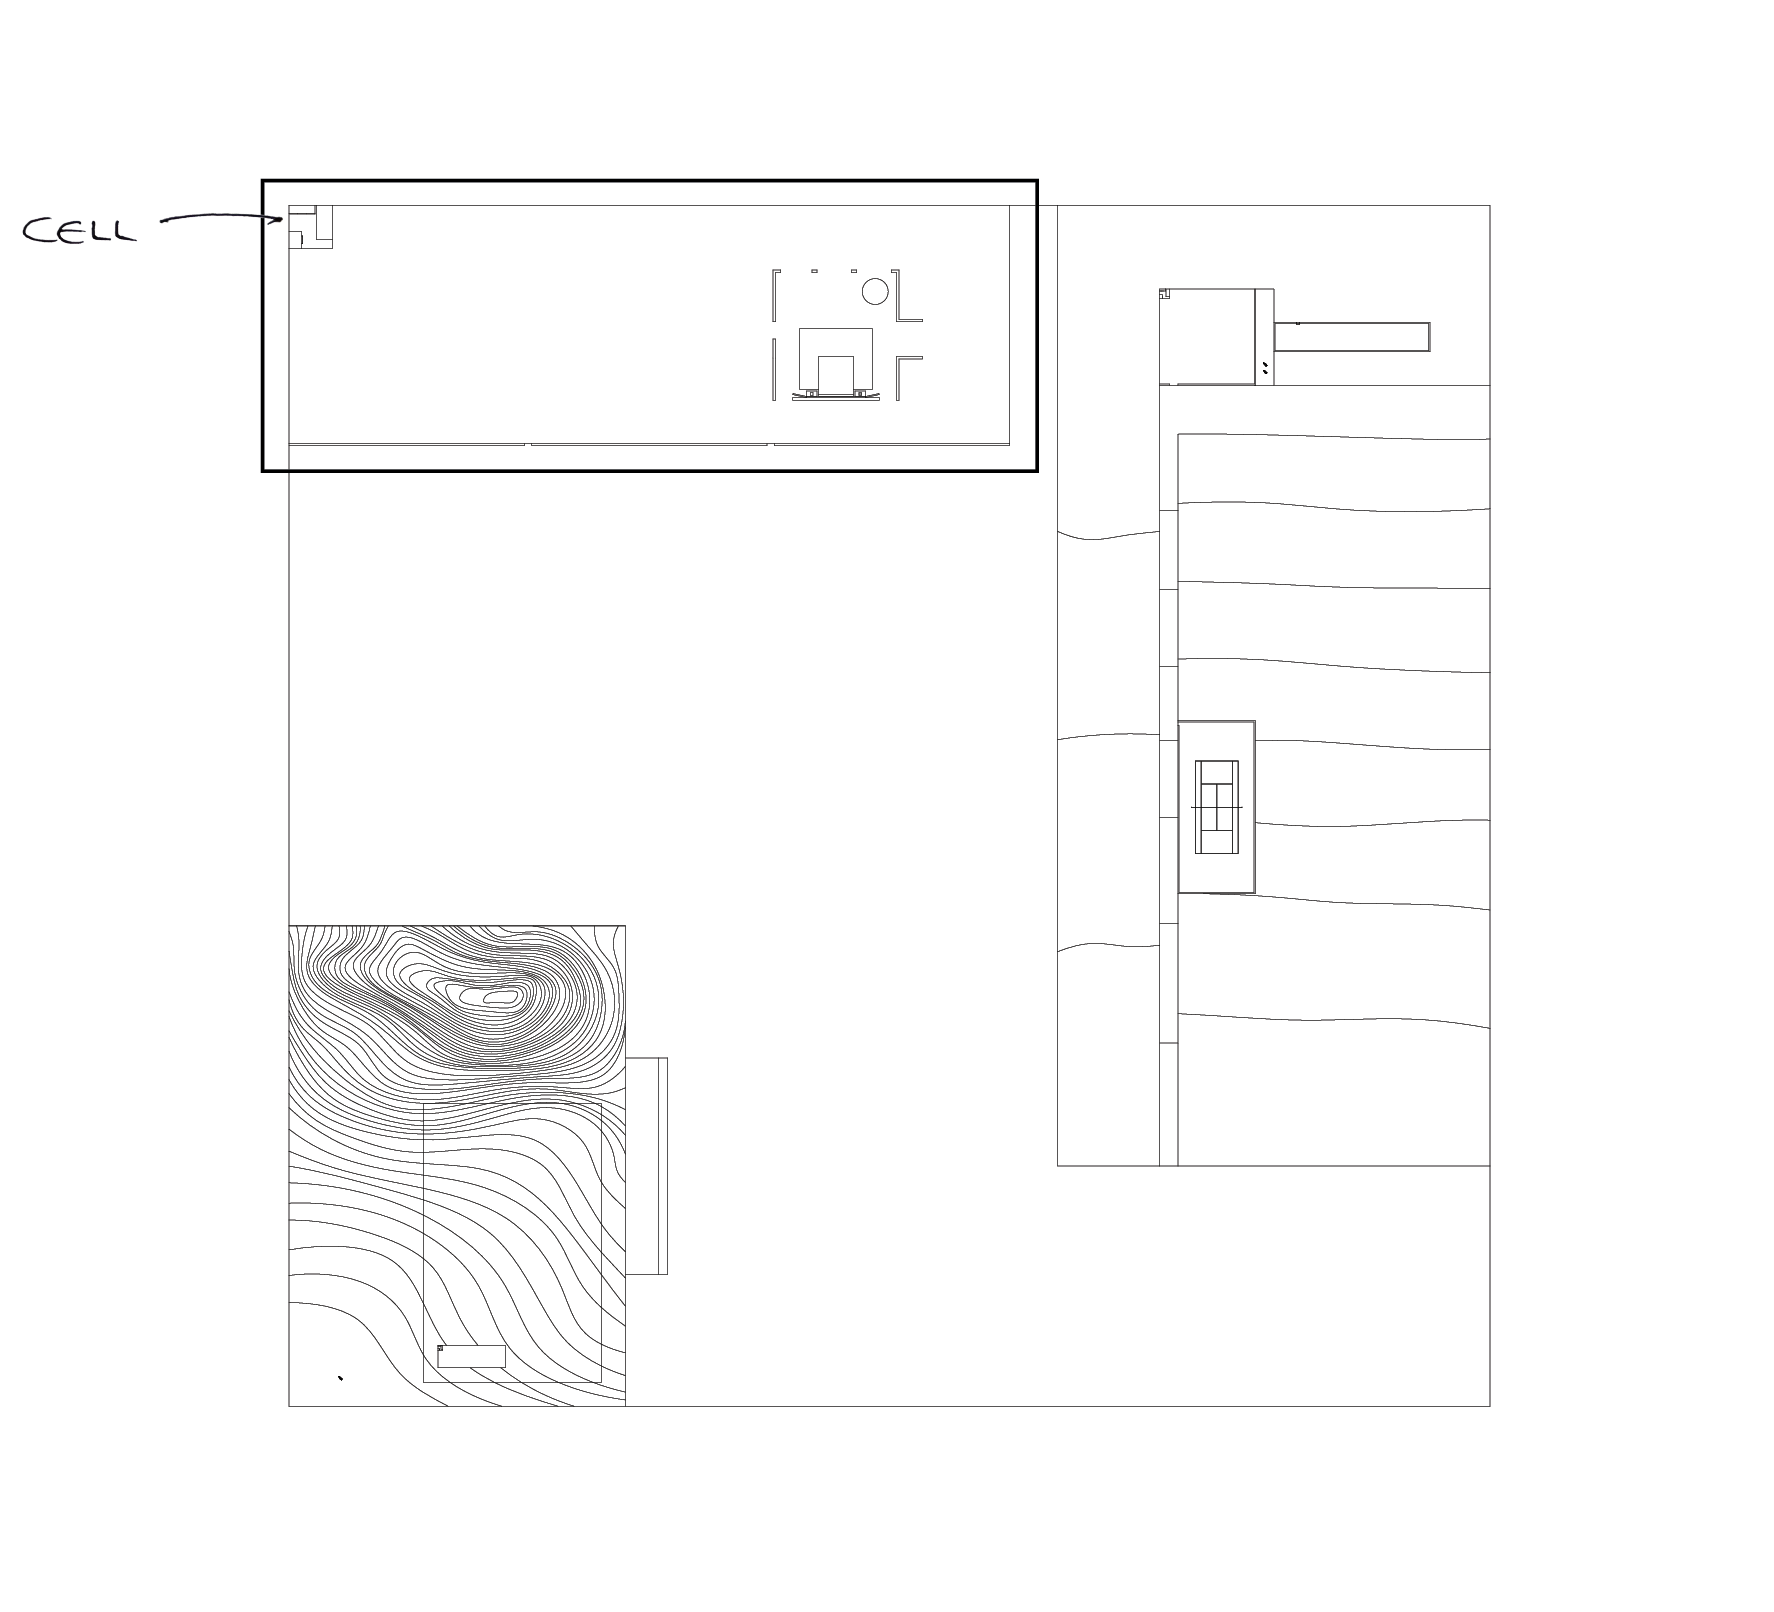 Archisearch A minimalist architect's cell | Thesis project by Theo Galliakis